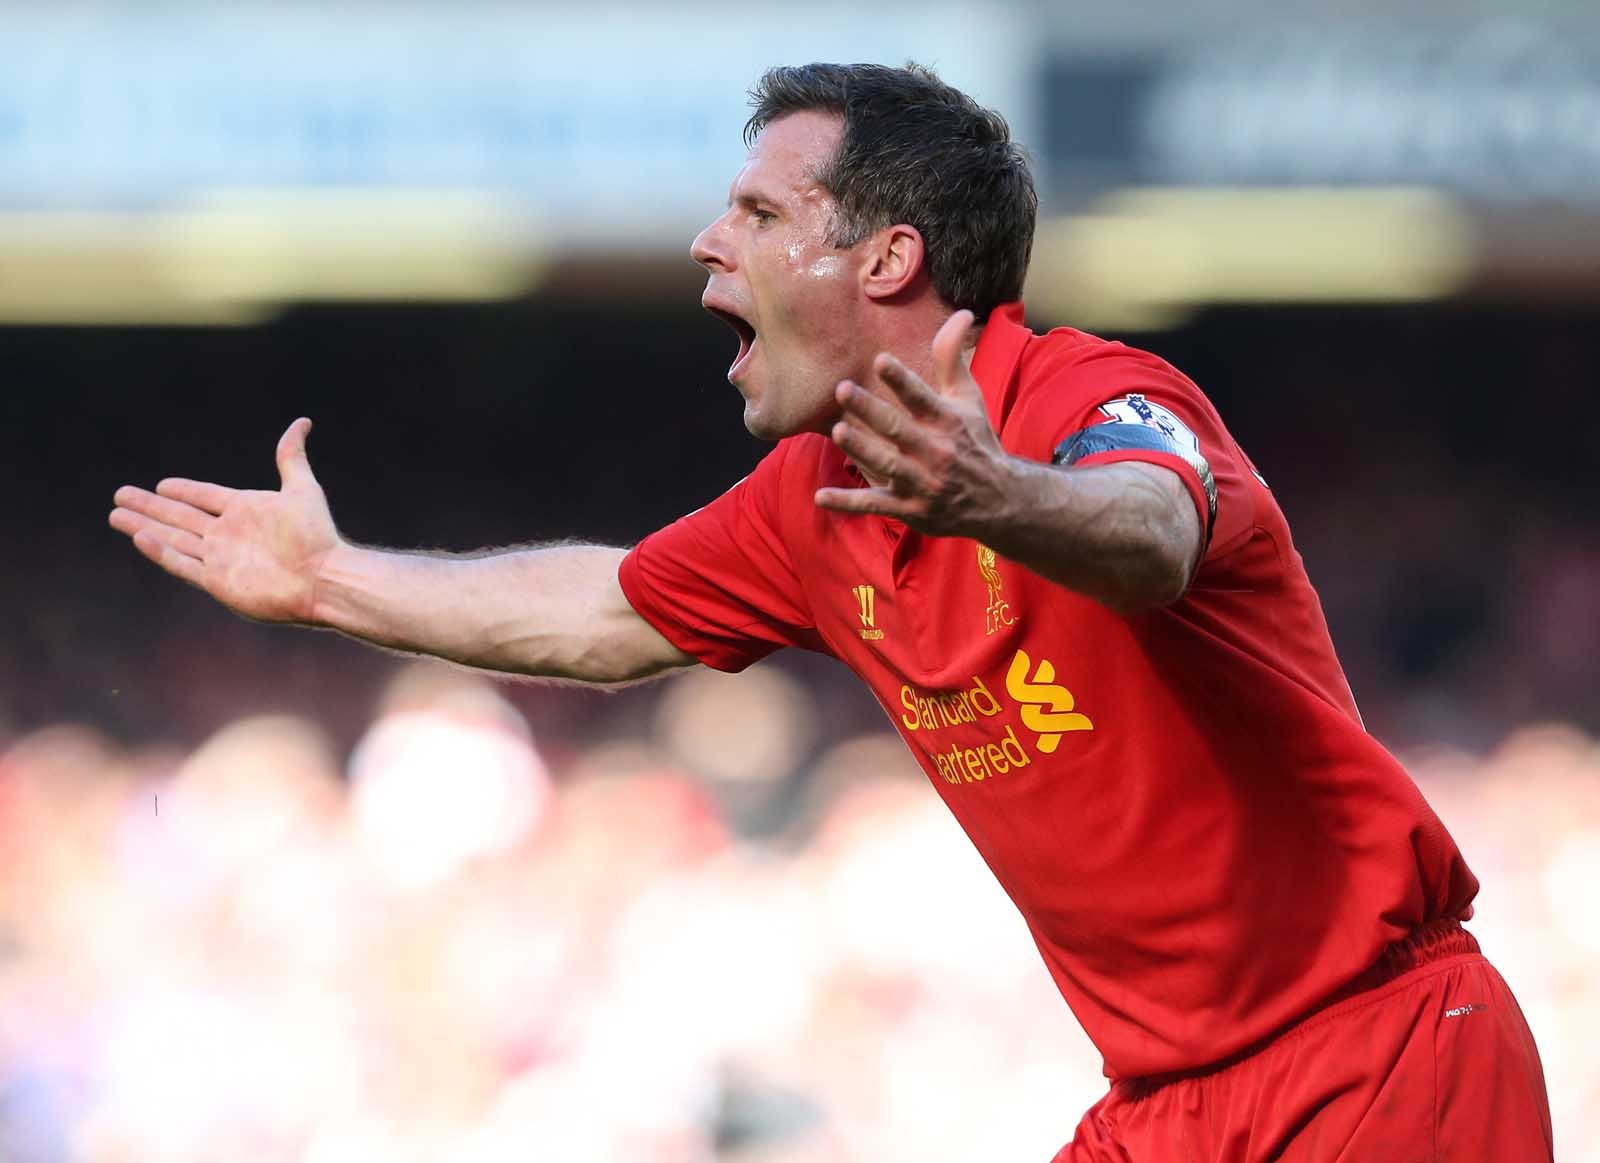 Liverpool fans react to legend Jamie Carragher’s appearance in Everton kit